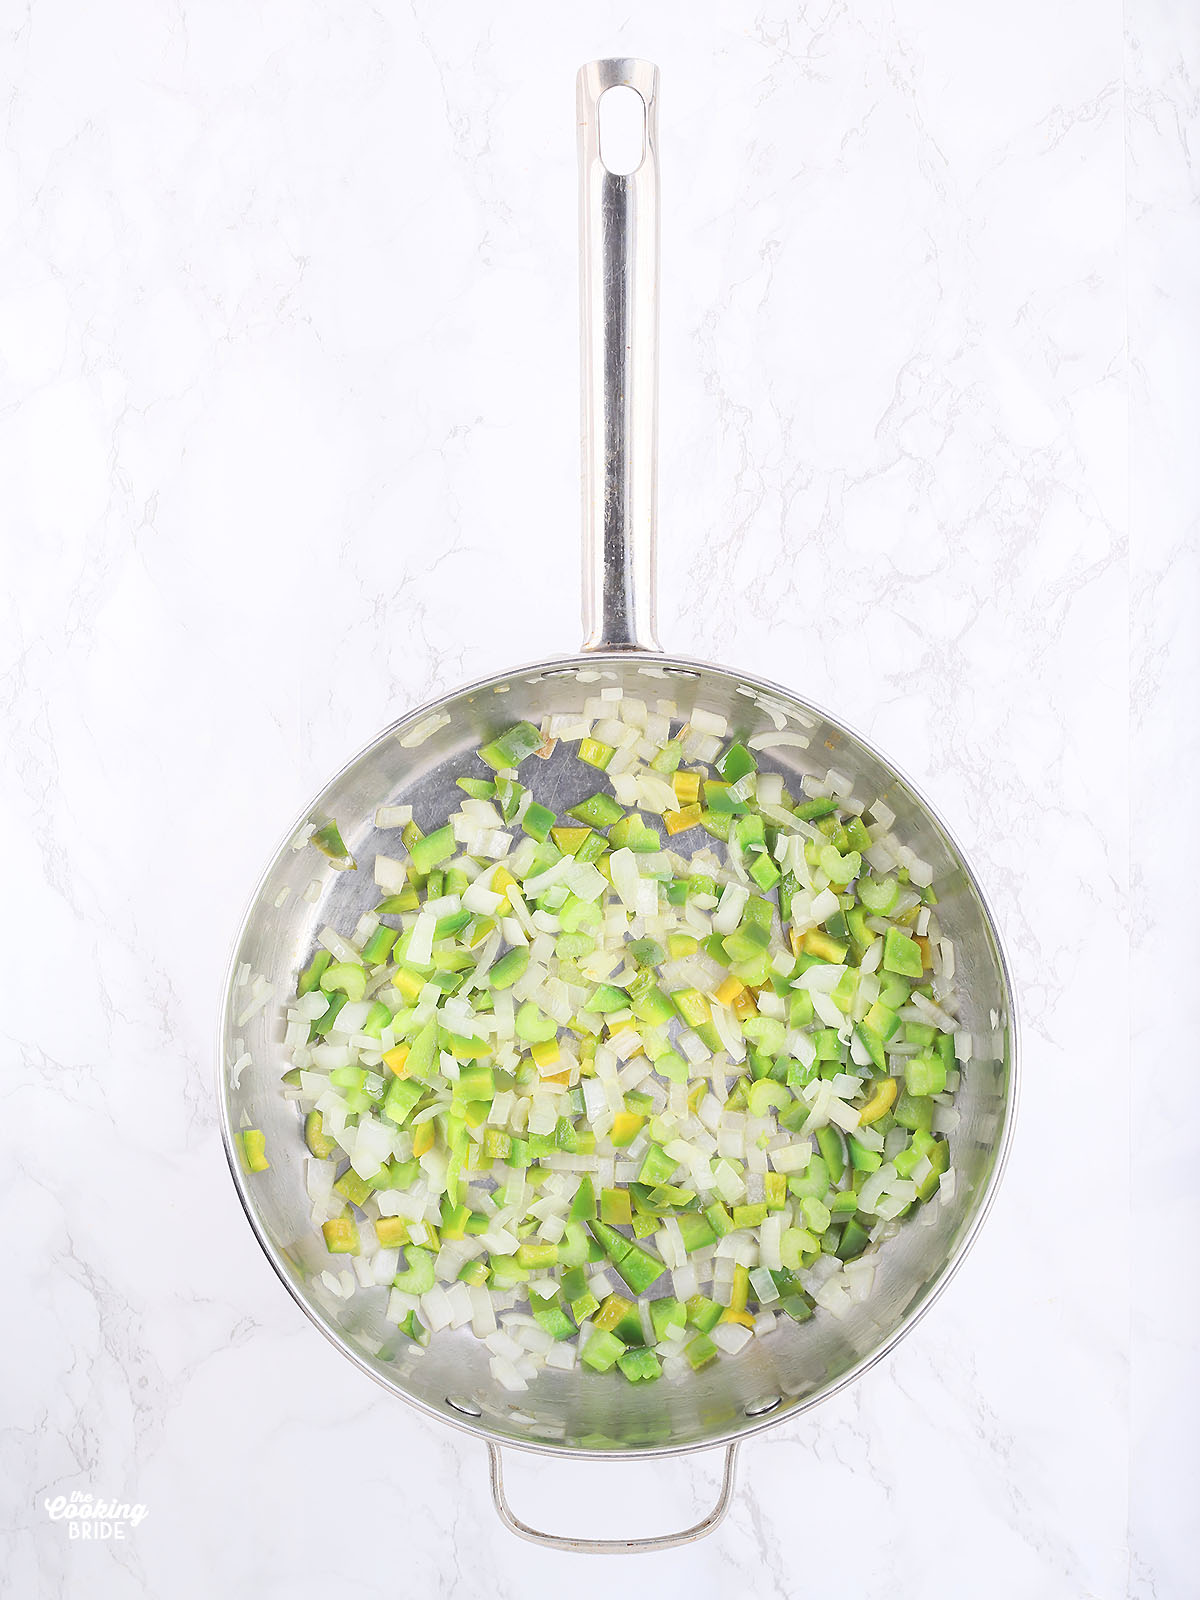 diced green bell peppers, celery and onions sautéing in melted butter